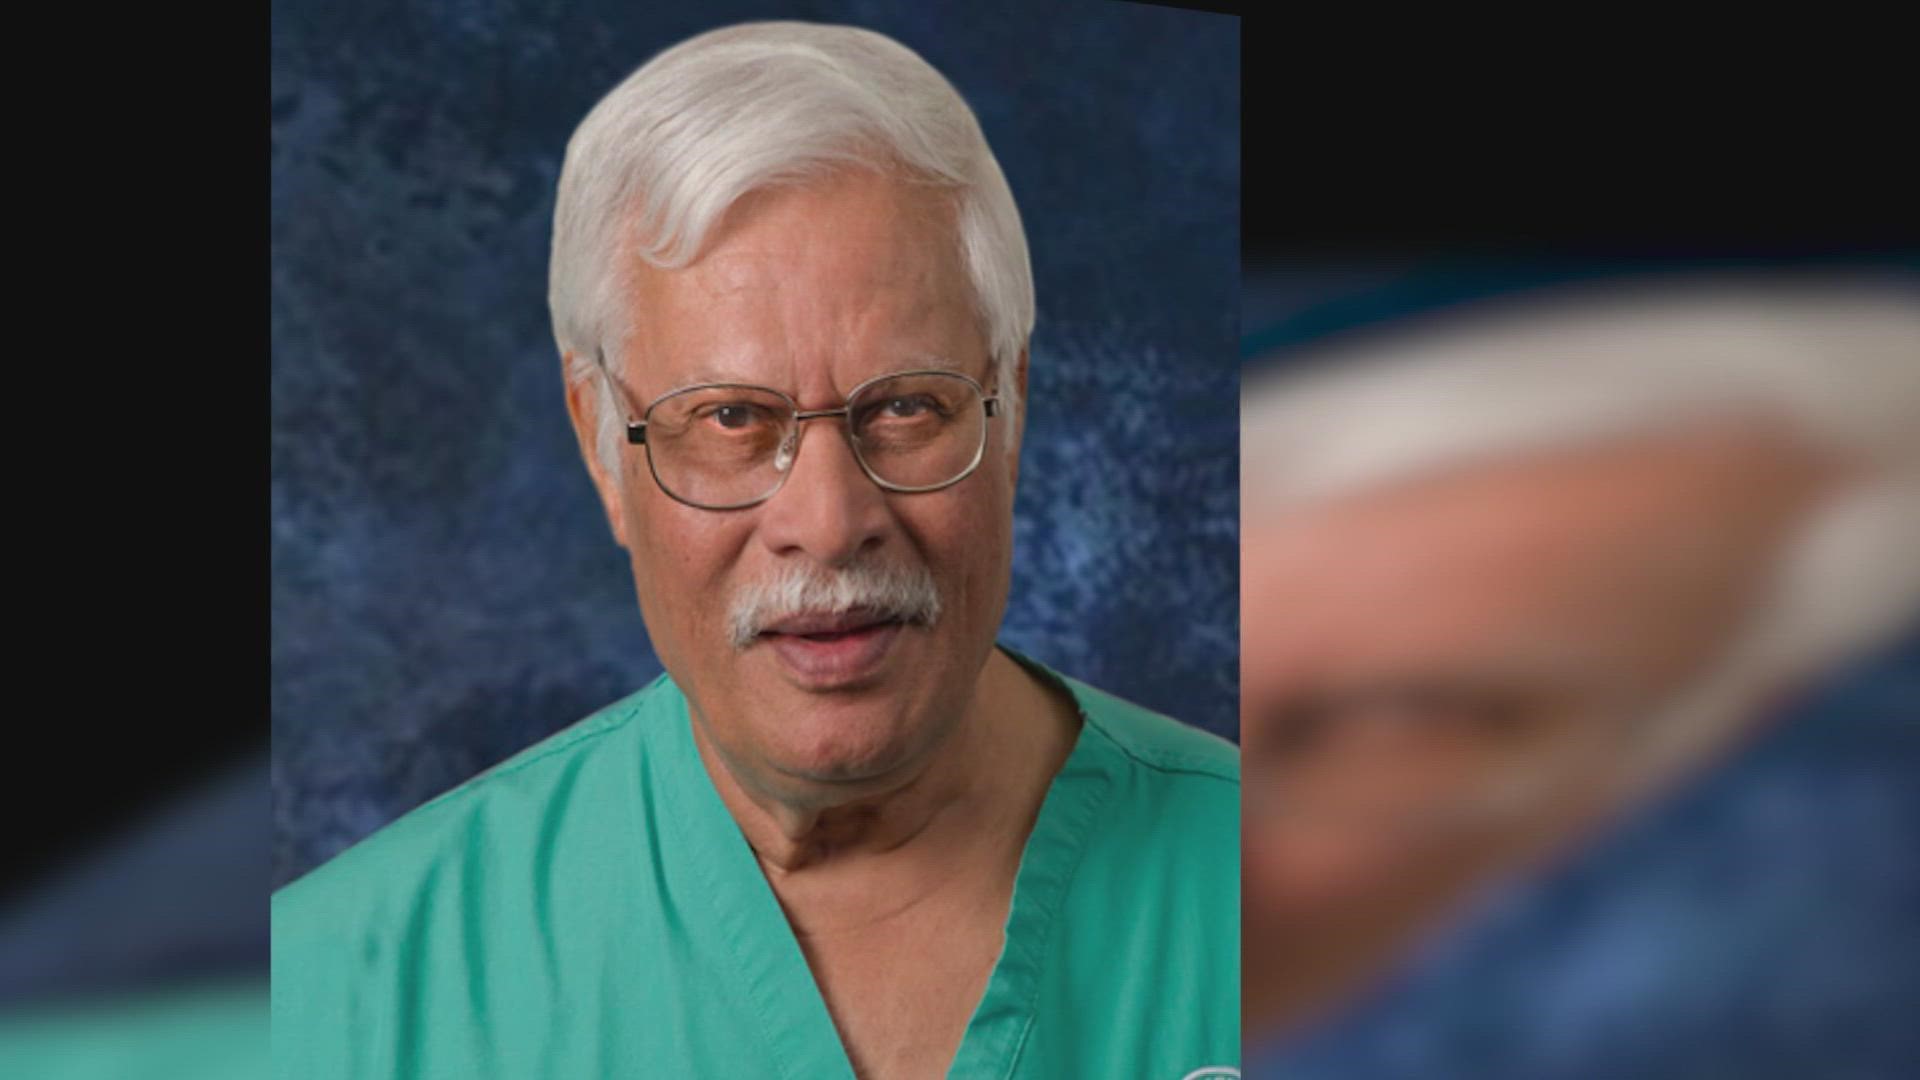 Dr. Nizam Peerwani was set to retire Thursday. Earlier this year, Dr. Peerwani audited the work of Deputy Medical Examiner Dr. Marc Krouse and found serious issues.